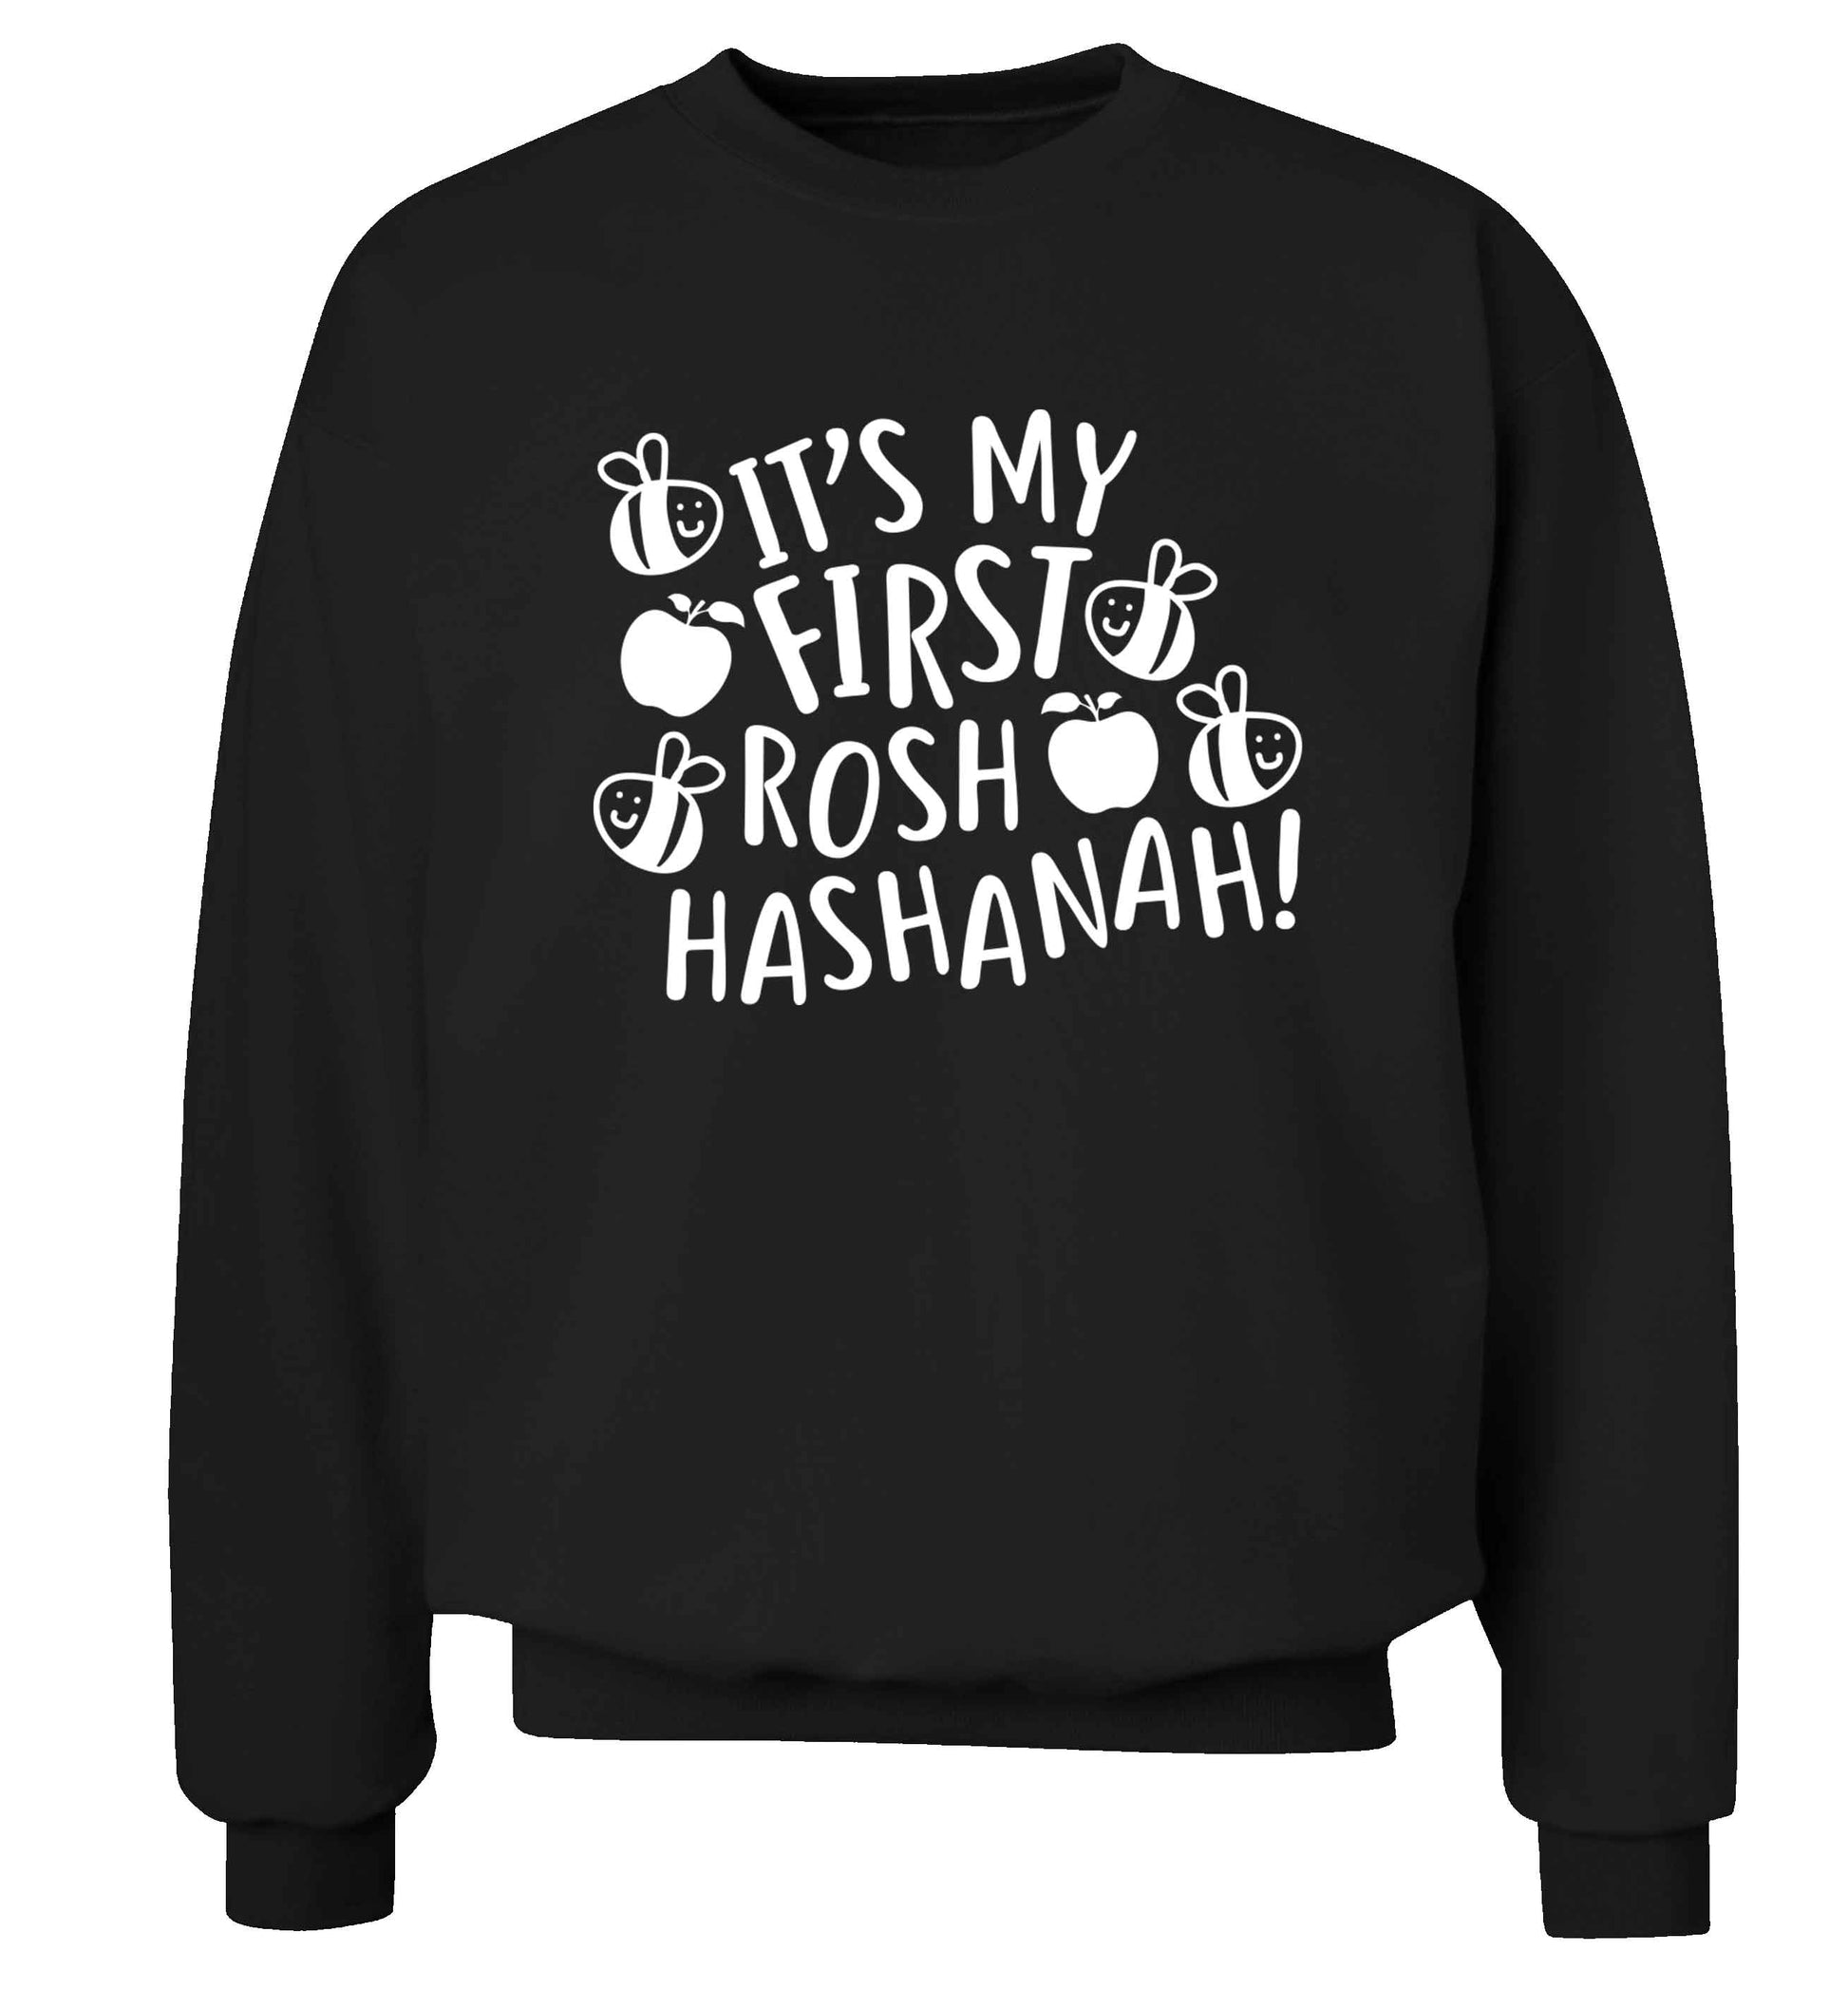 Its my first rosh hashanah Adult's unisex black Sweater 2XL